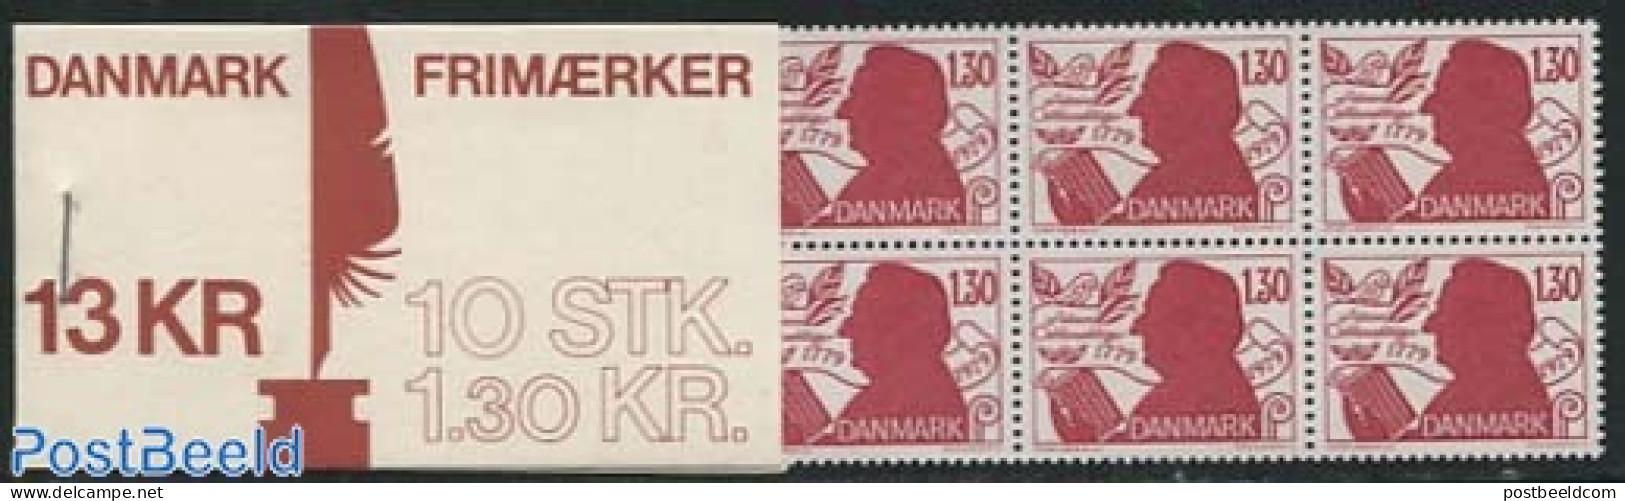 Denmark 1979 Adam Oehlenschlager Booklet, Mint NH, Stamp Booklets - Authors - Unused Stamps